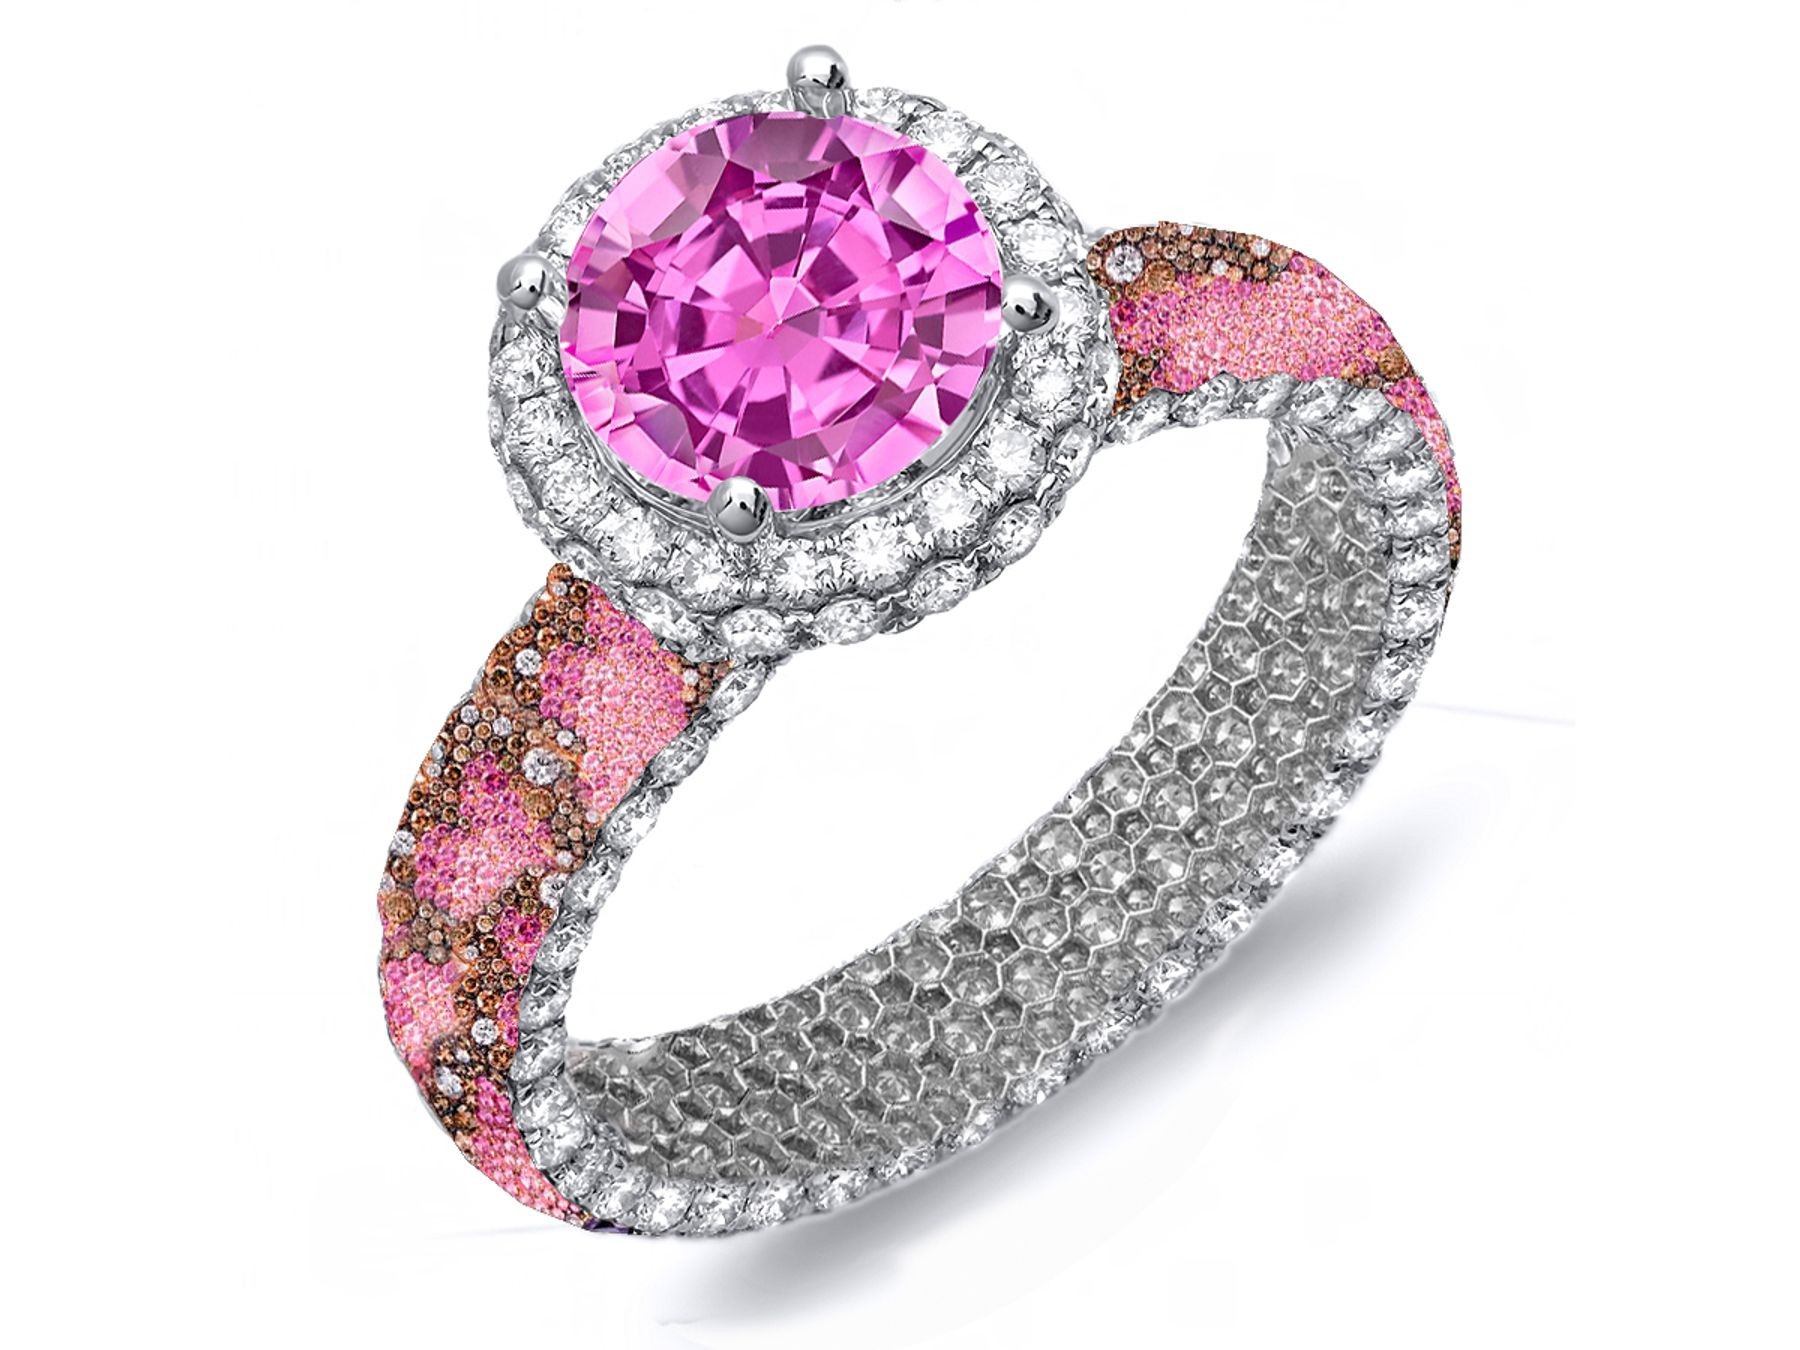 Made To Order Delicate Micro Pave Cluster Diamond & Multi-Colored Precious Stones Rubies, Emeralds & Sapphires